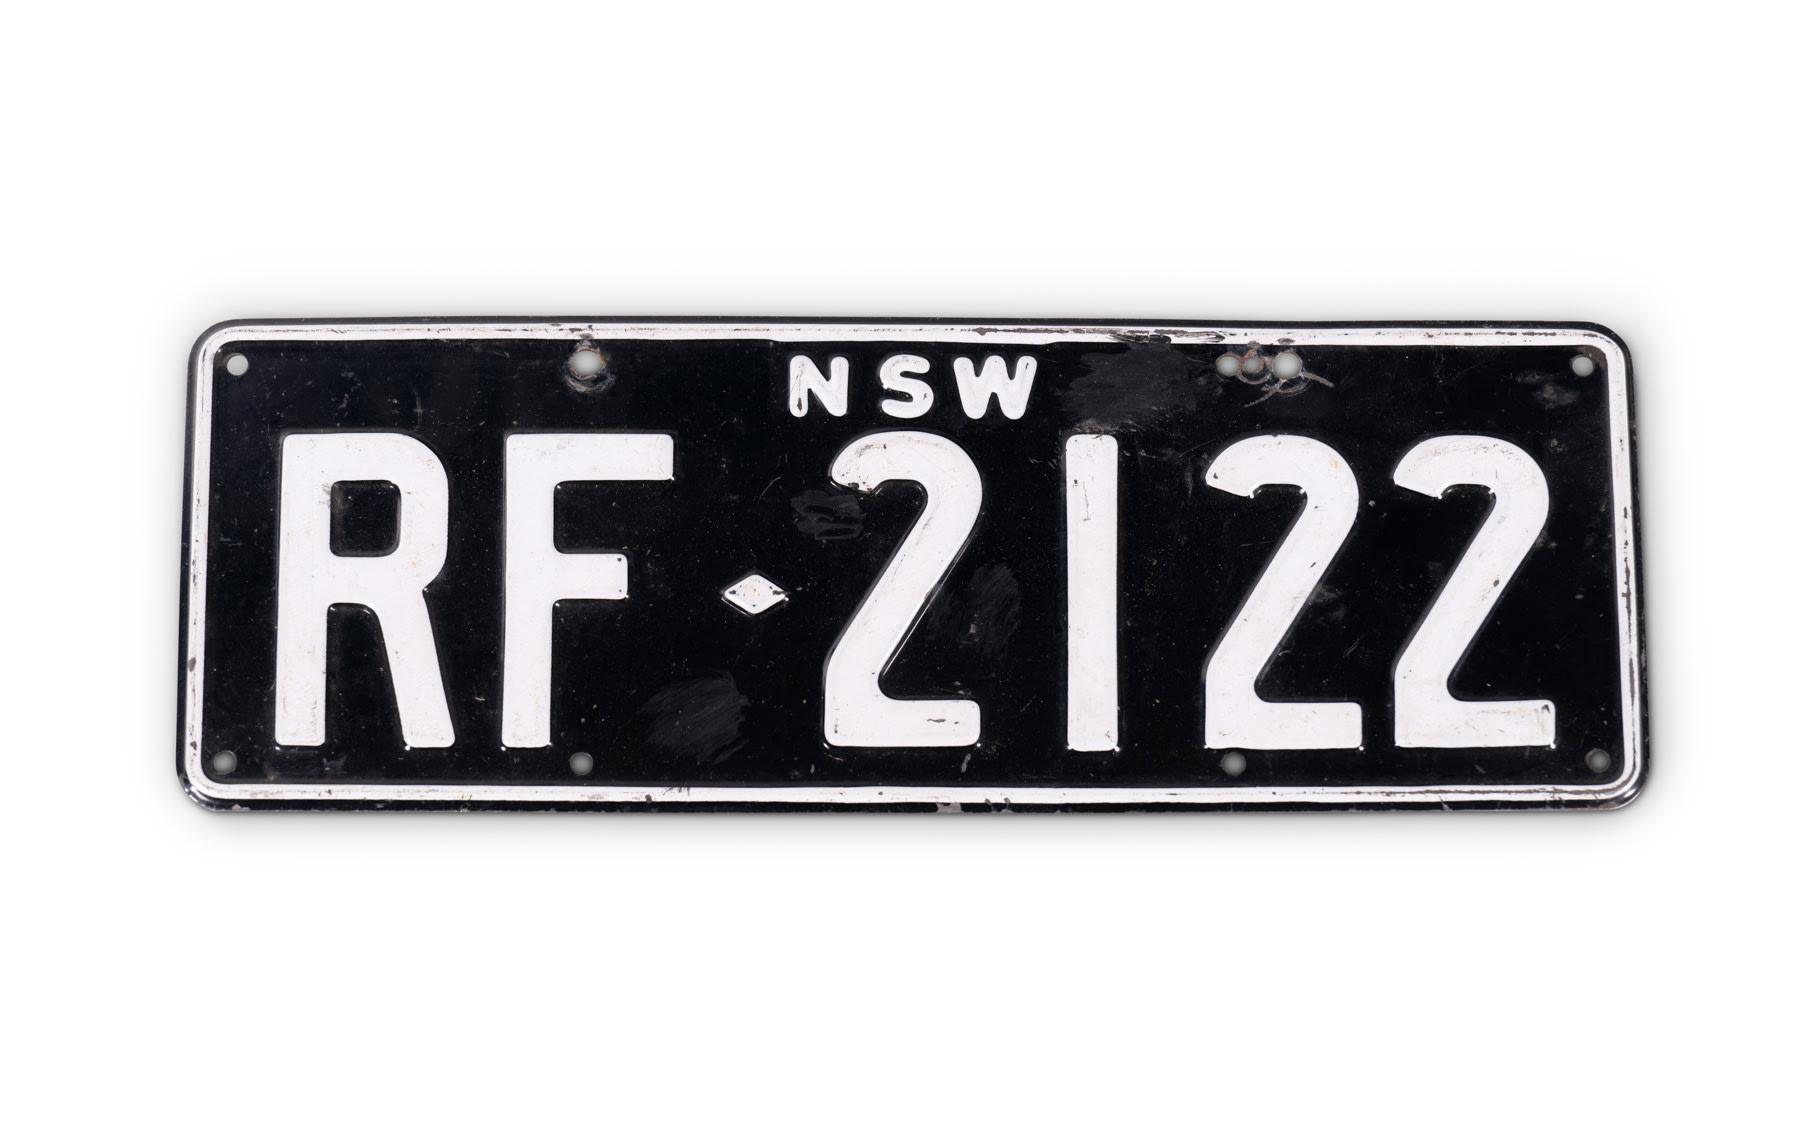 Australian New South Wales License Plate